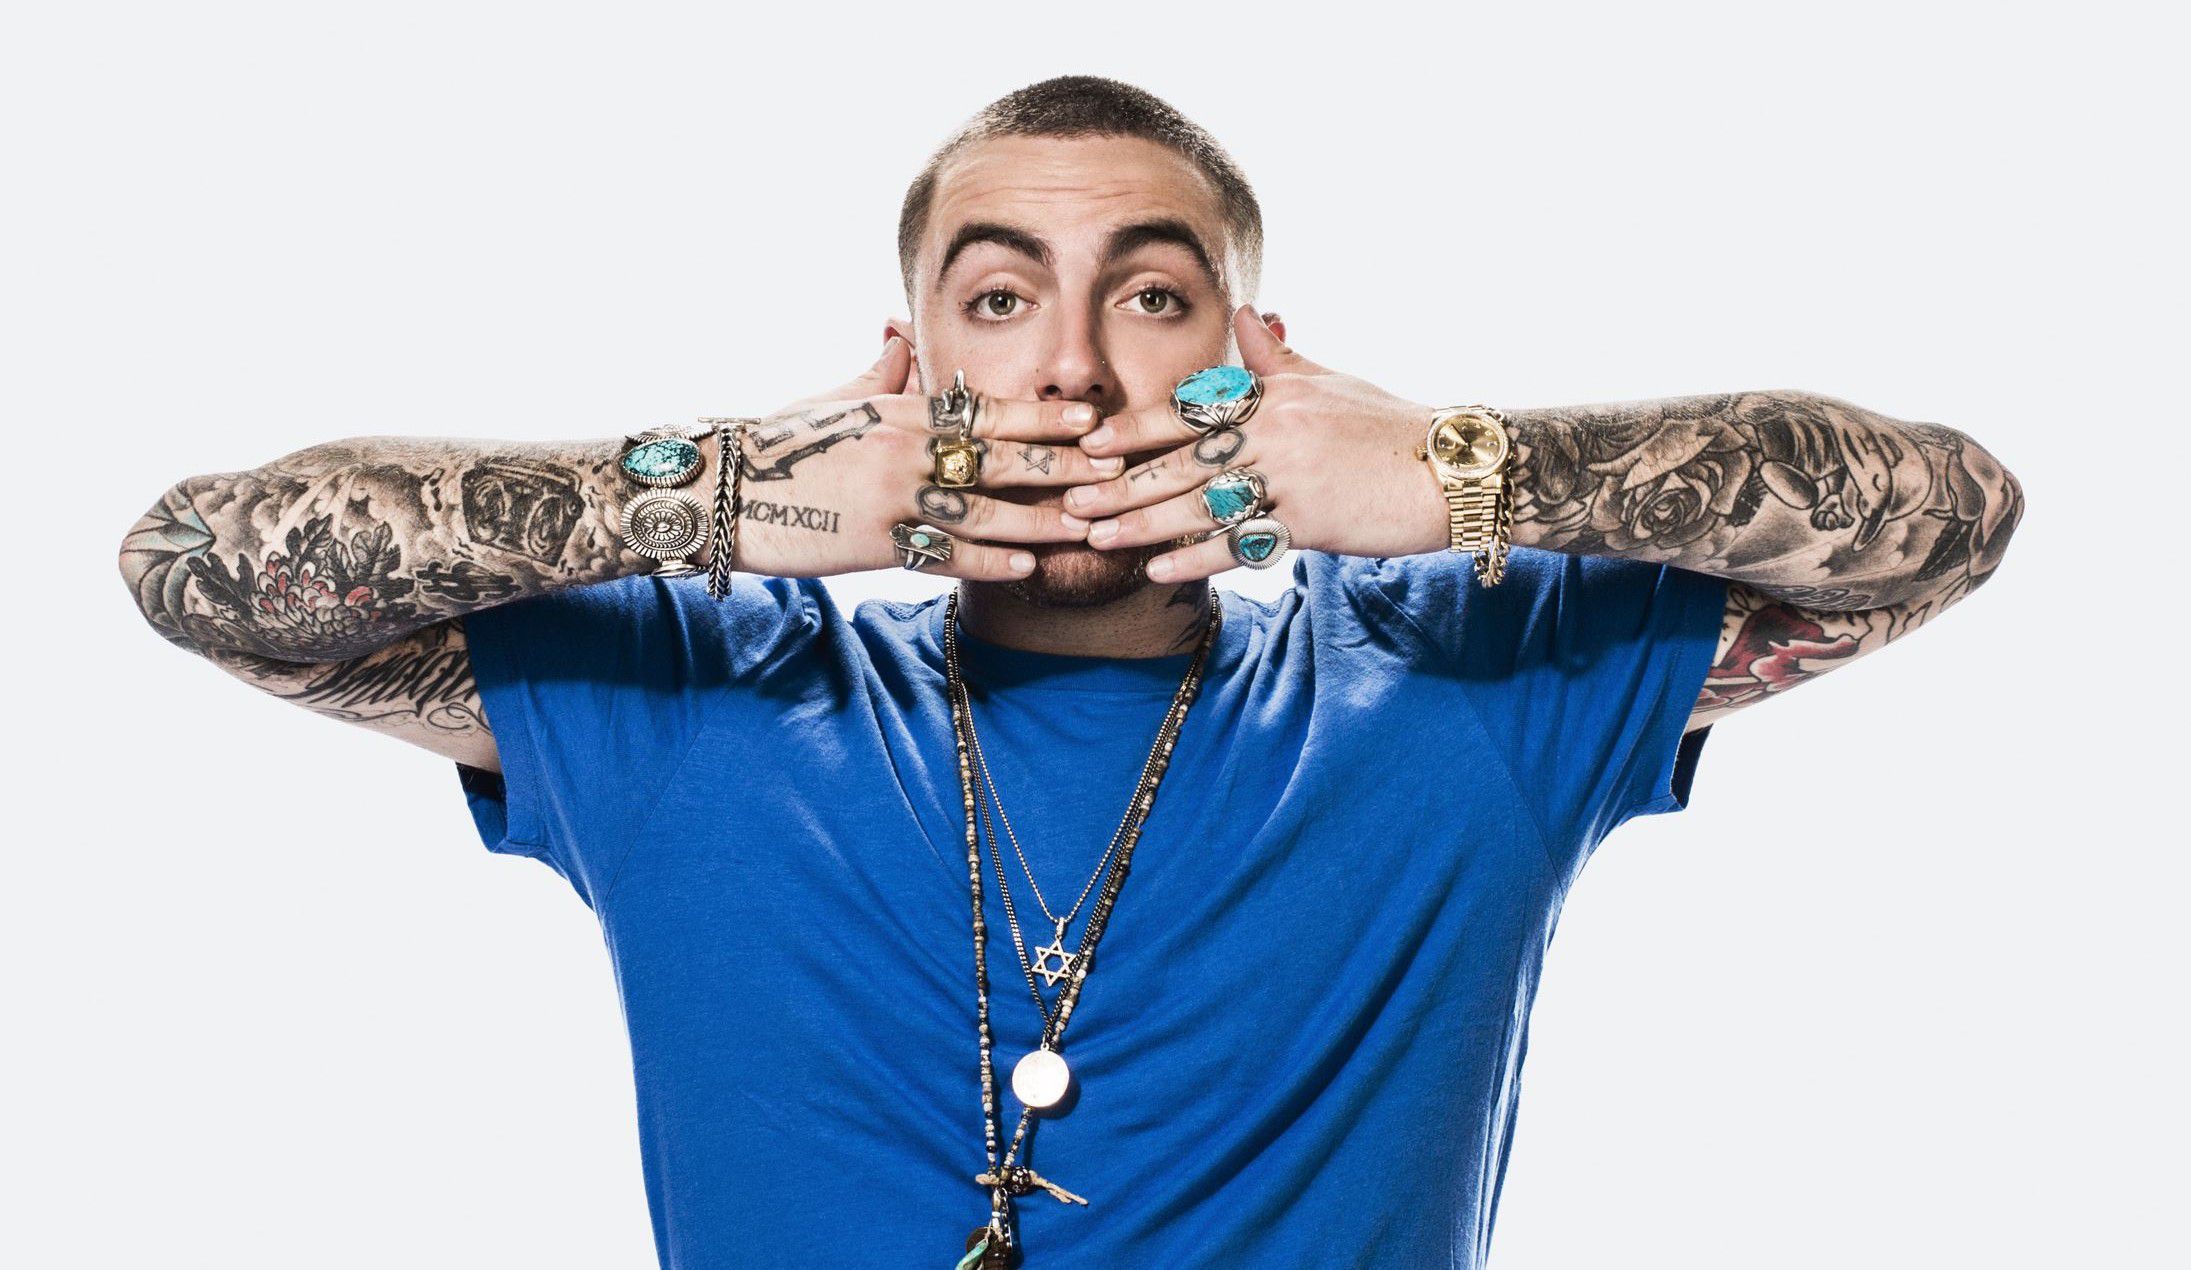 Mac Miller Wallpapers Images Photos Pictures Backgrounds